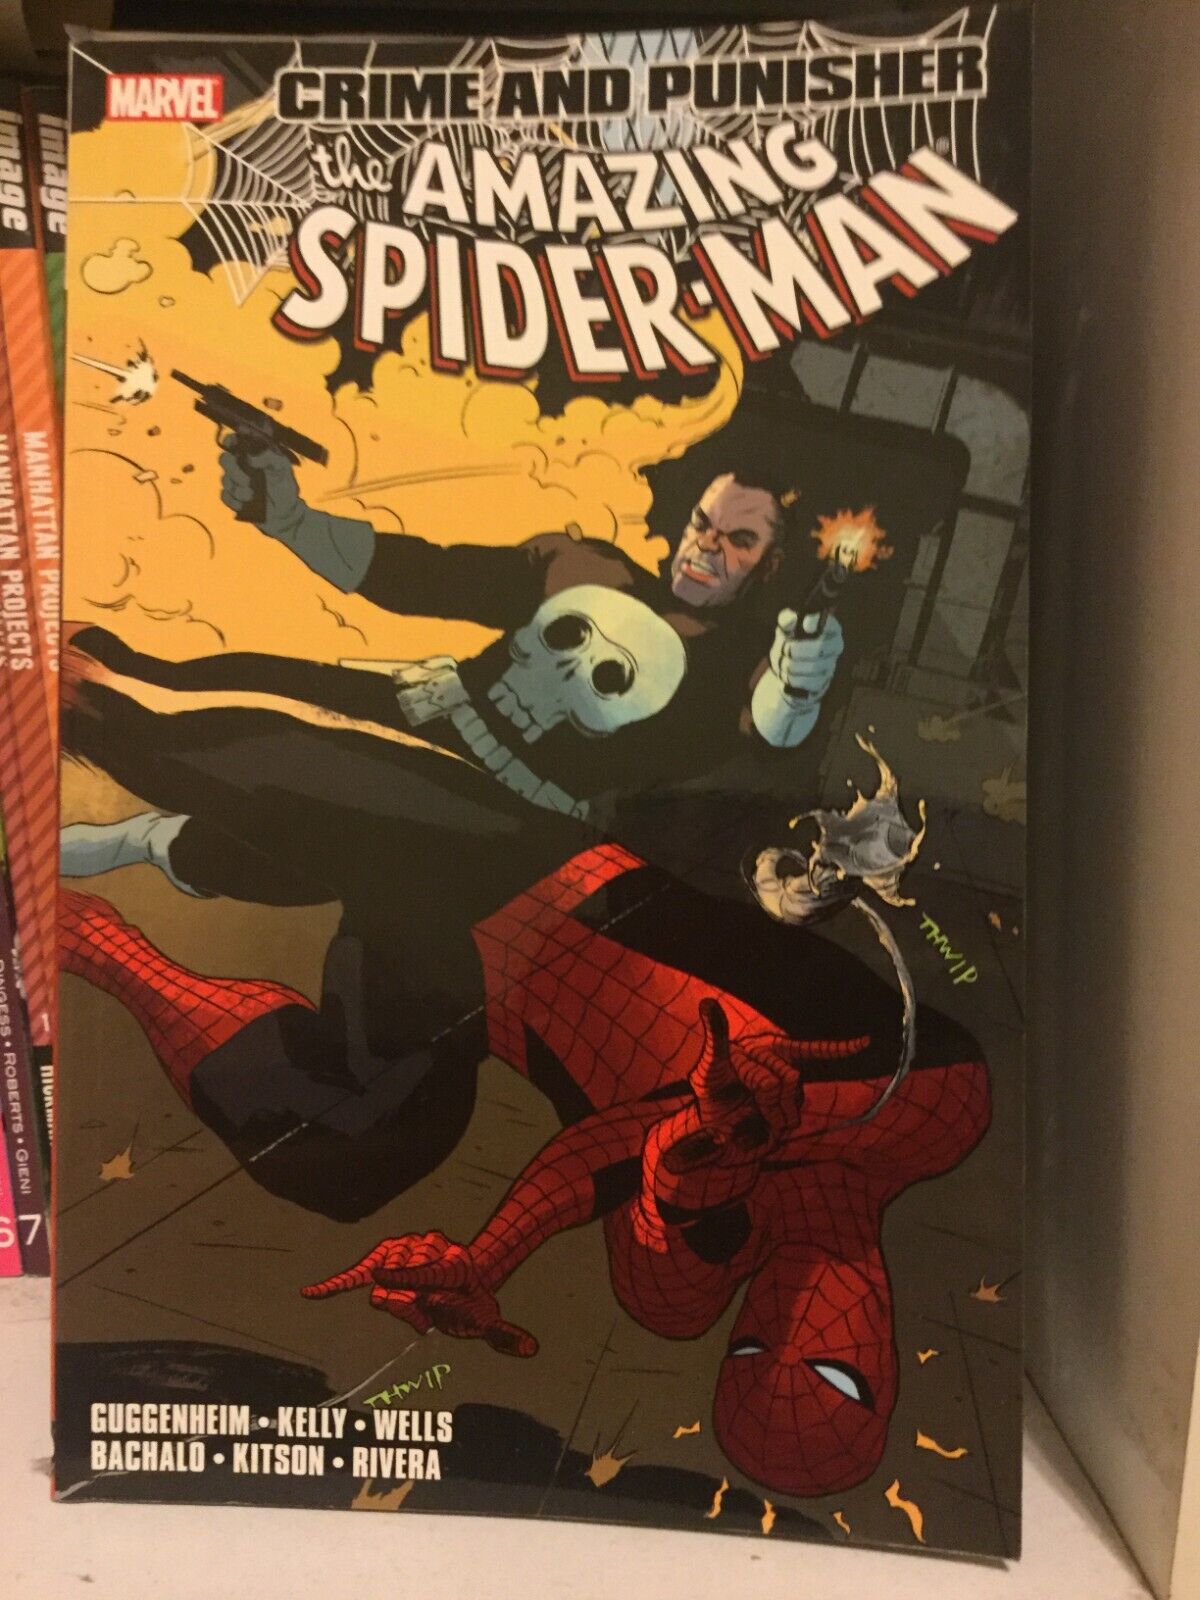 Amazing Spider-Man Vol. 6: Crime and Punisher Trade Paperback OOP Brand New Day